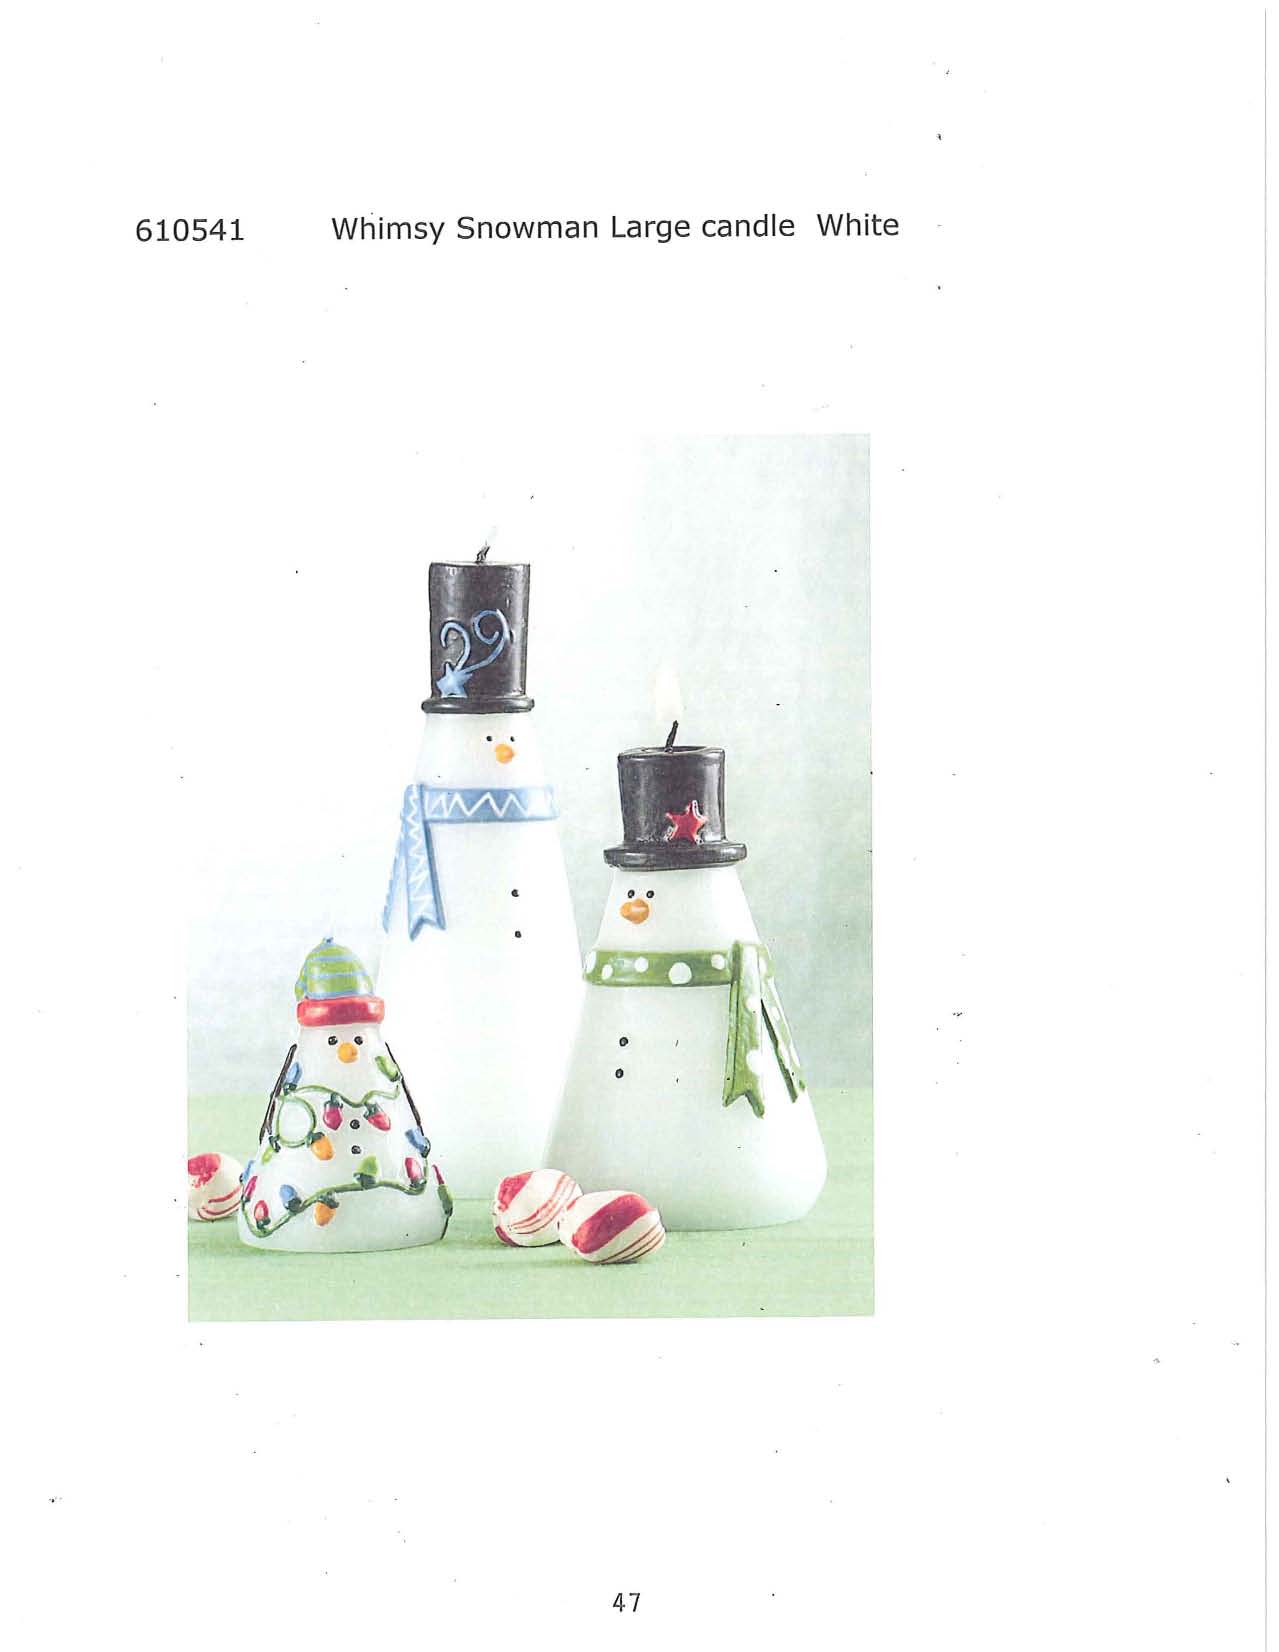 Whimsy Snowman Large Candle - White